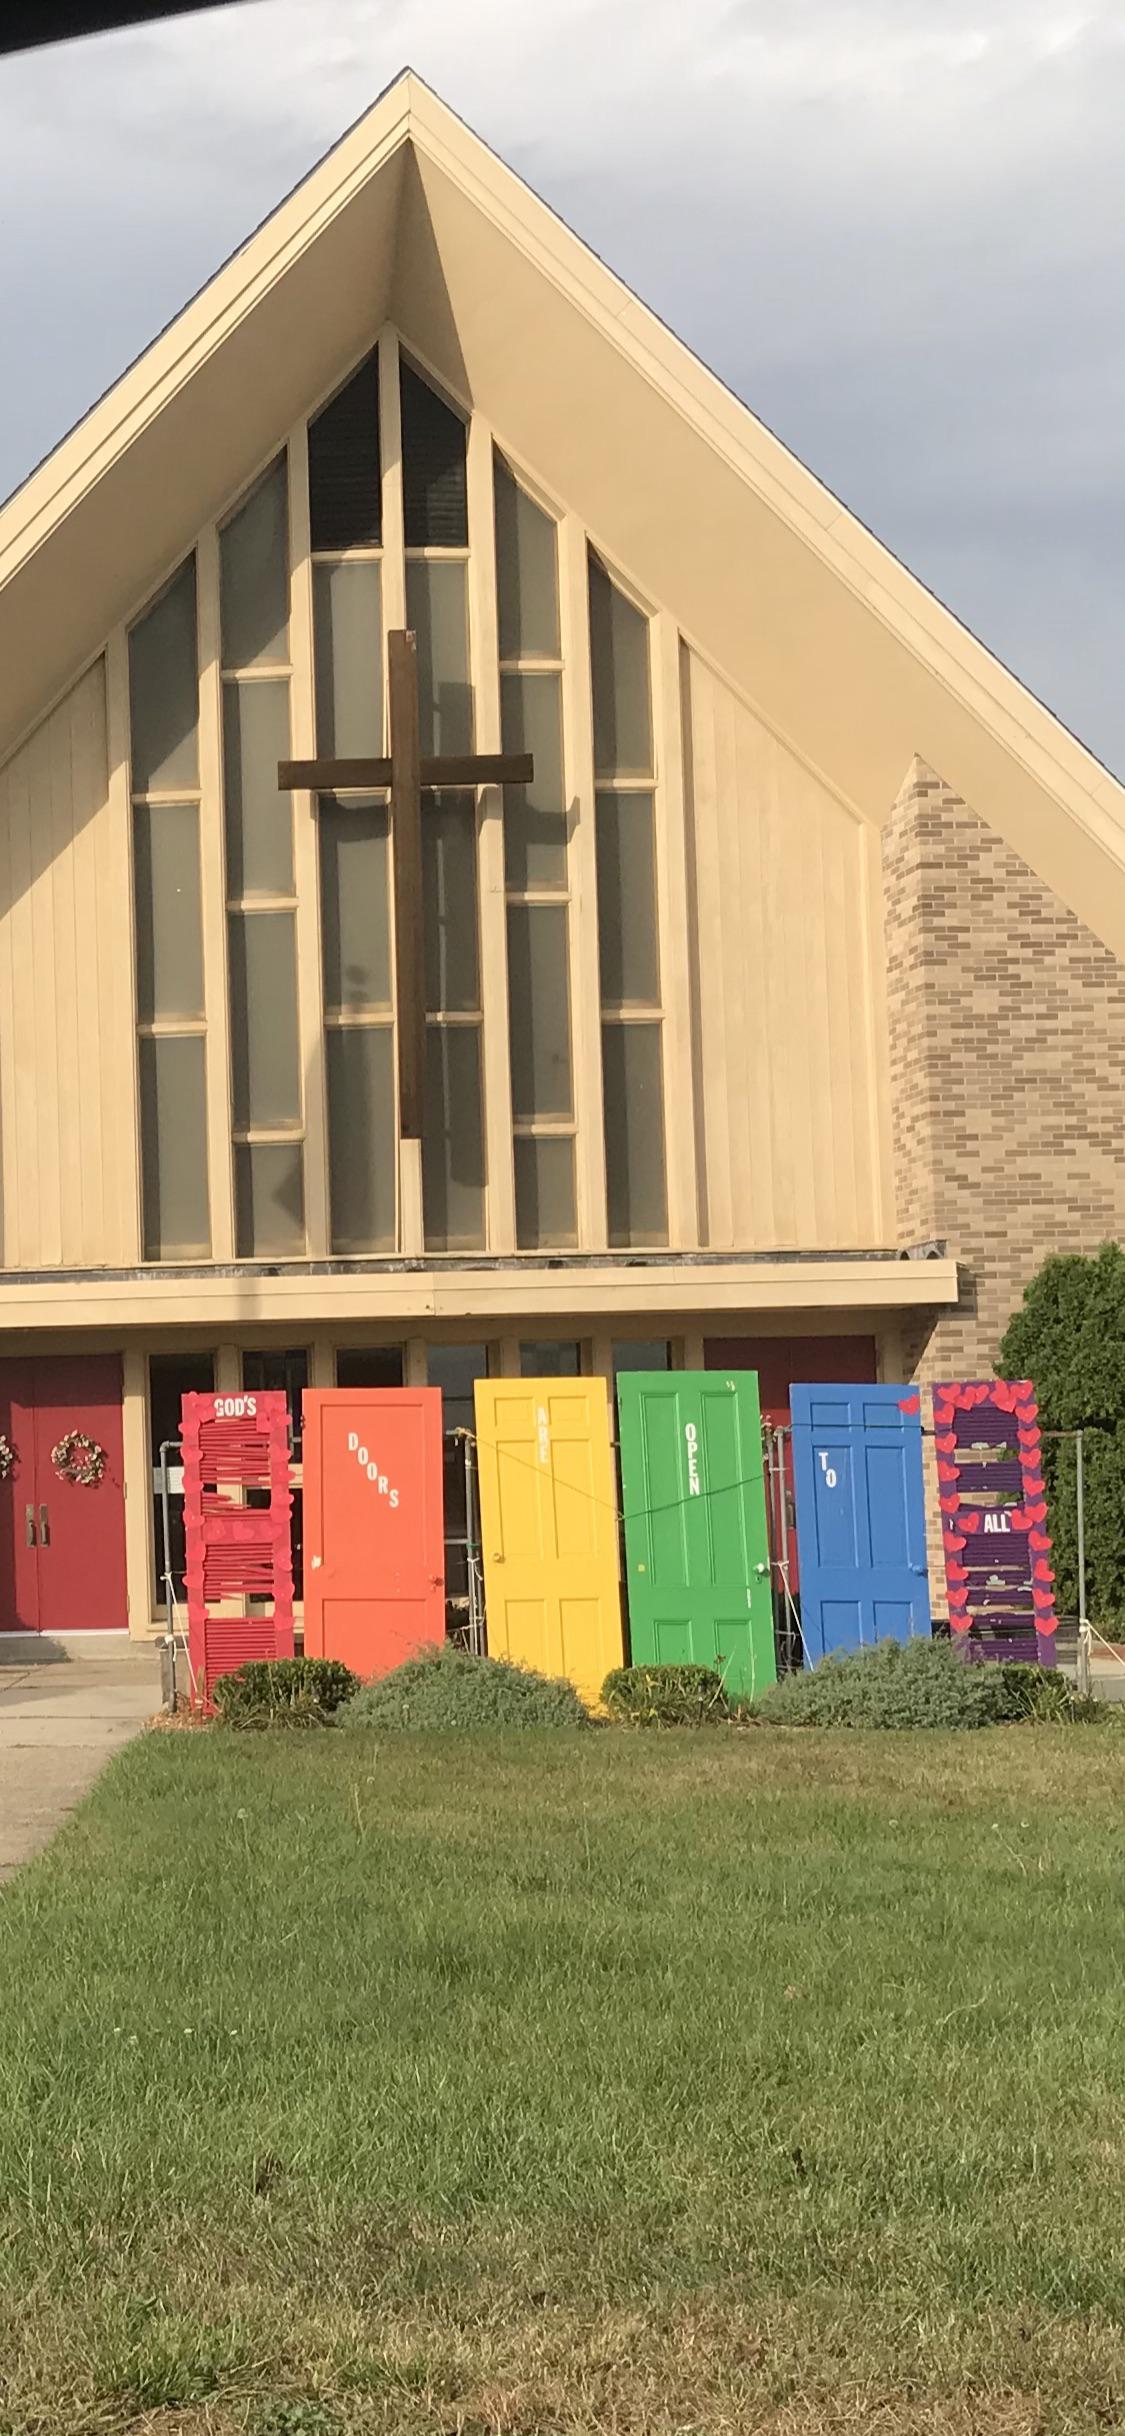 Local pastor: did you know gay people also have wallets?